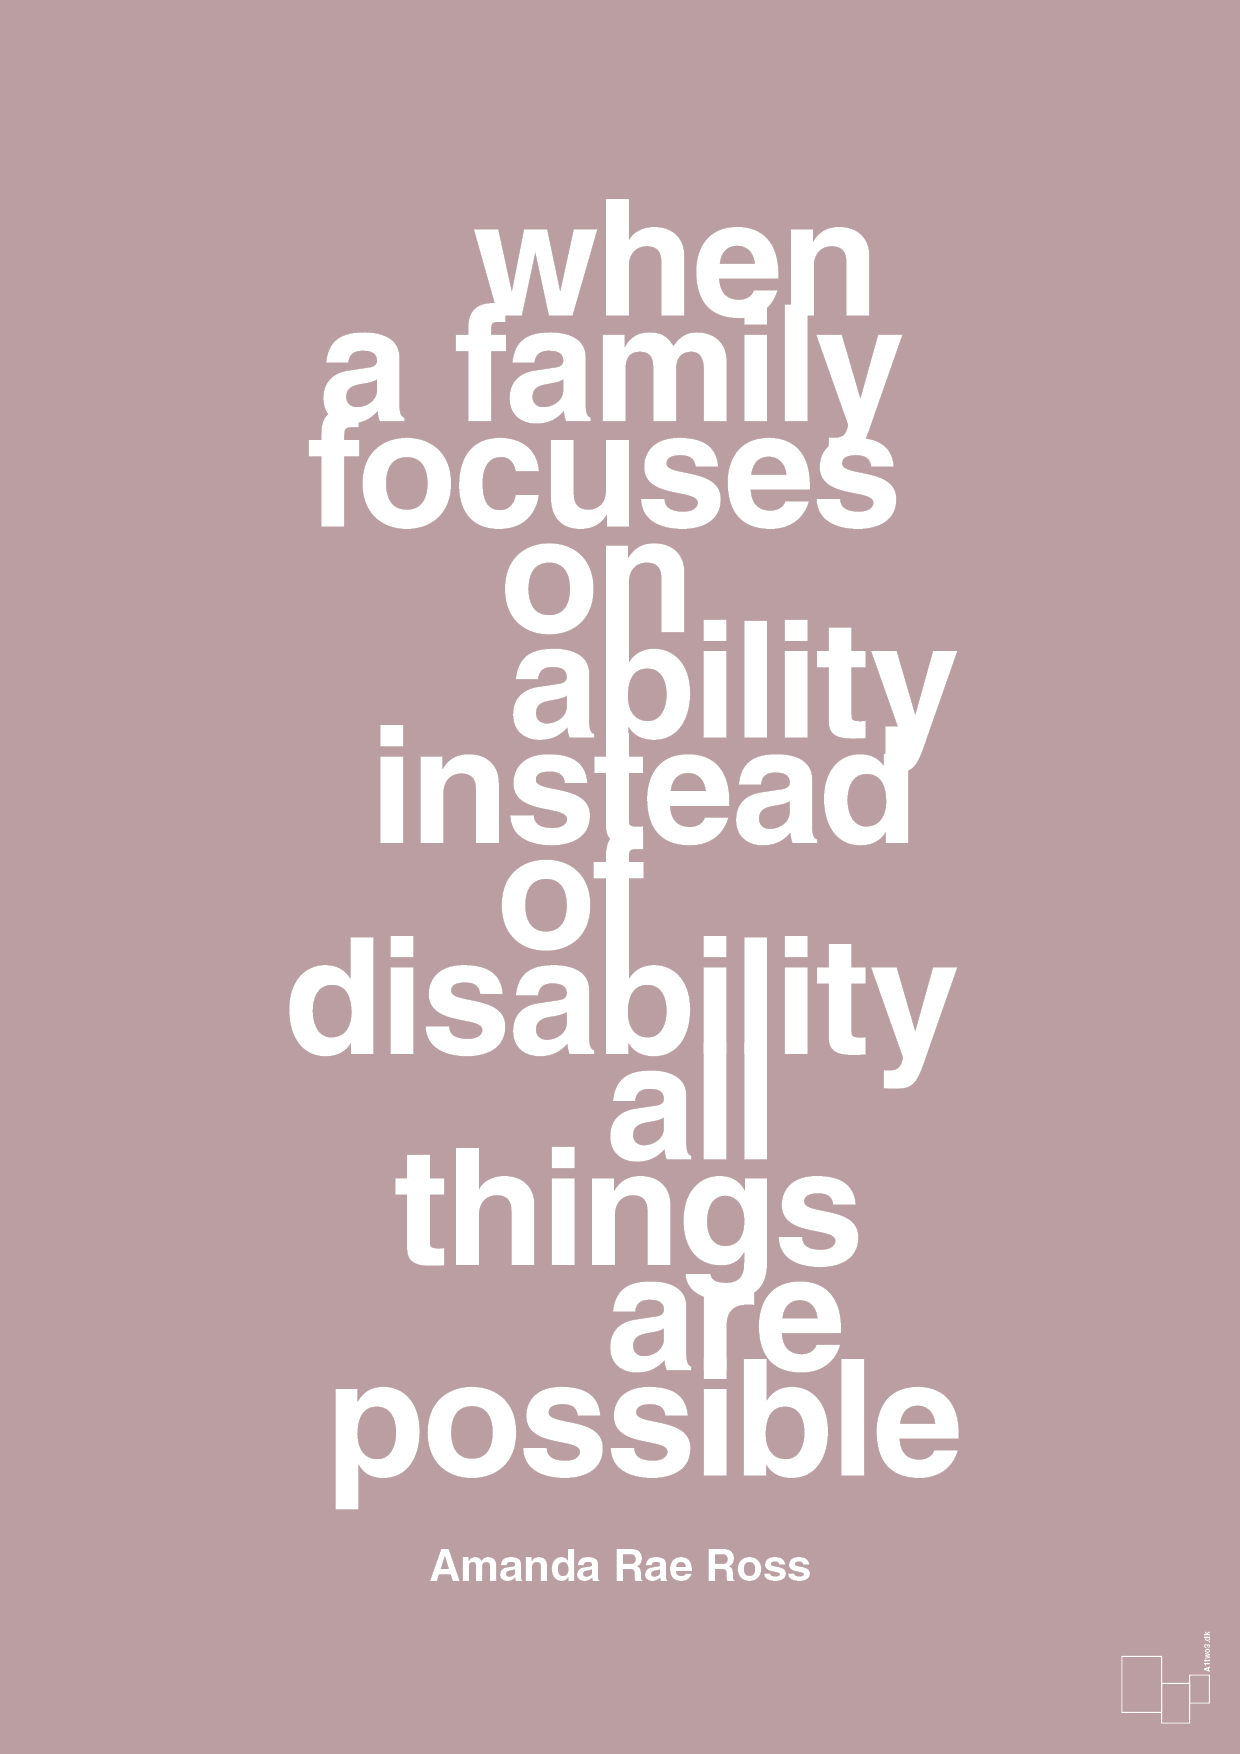 when a family focuses on ability instead of disability all things are possible - Plakat med Samfund i Light Rose